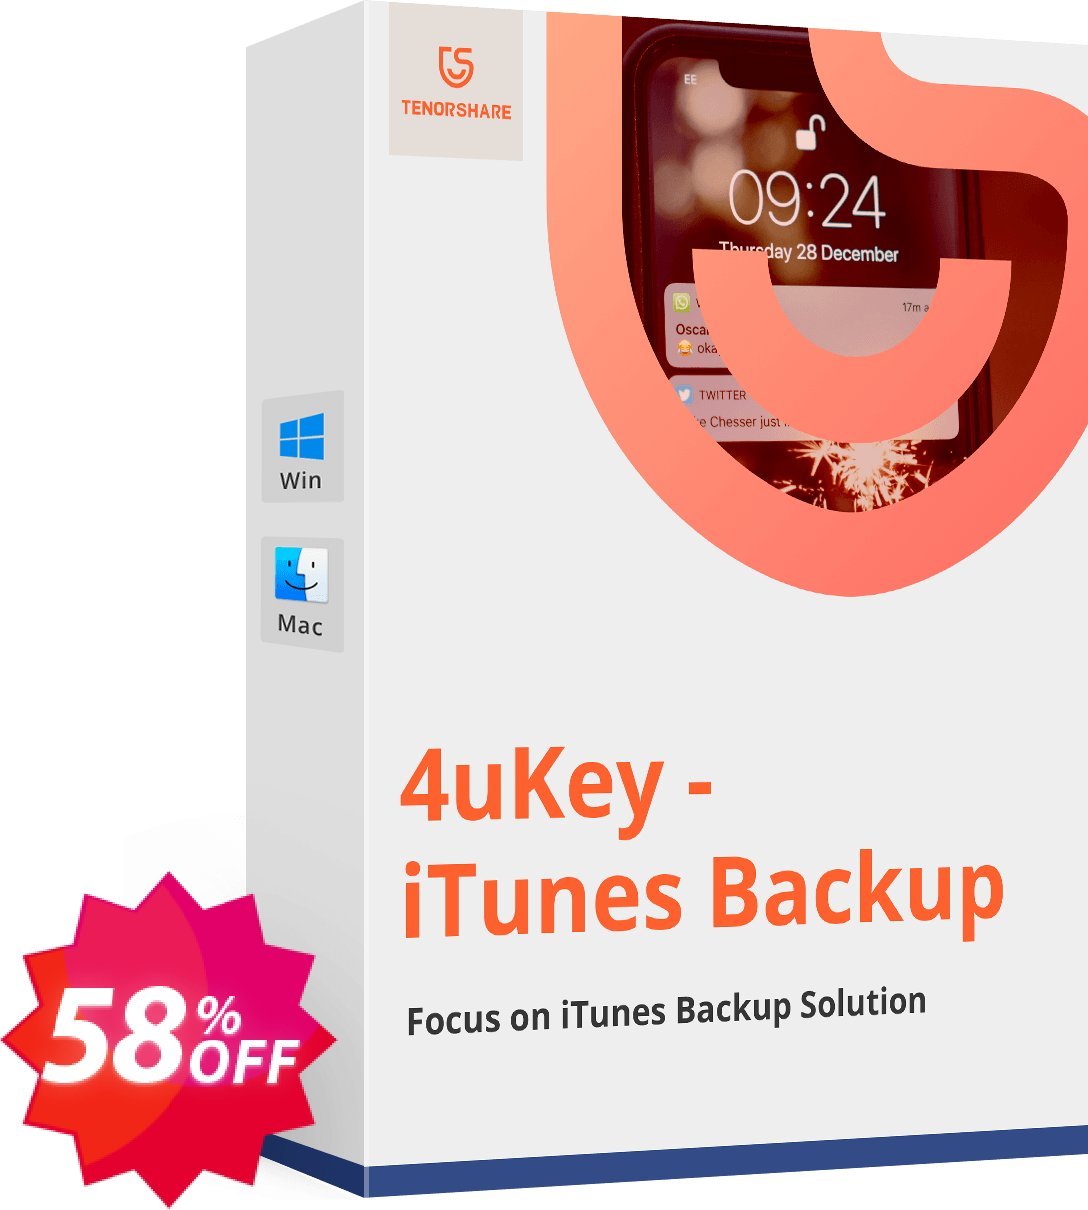 Tenorshare 4uKey iTunes Backup for MAC, Monthly Plan  Coupon code 58% discount 